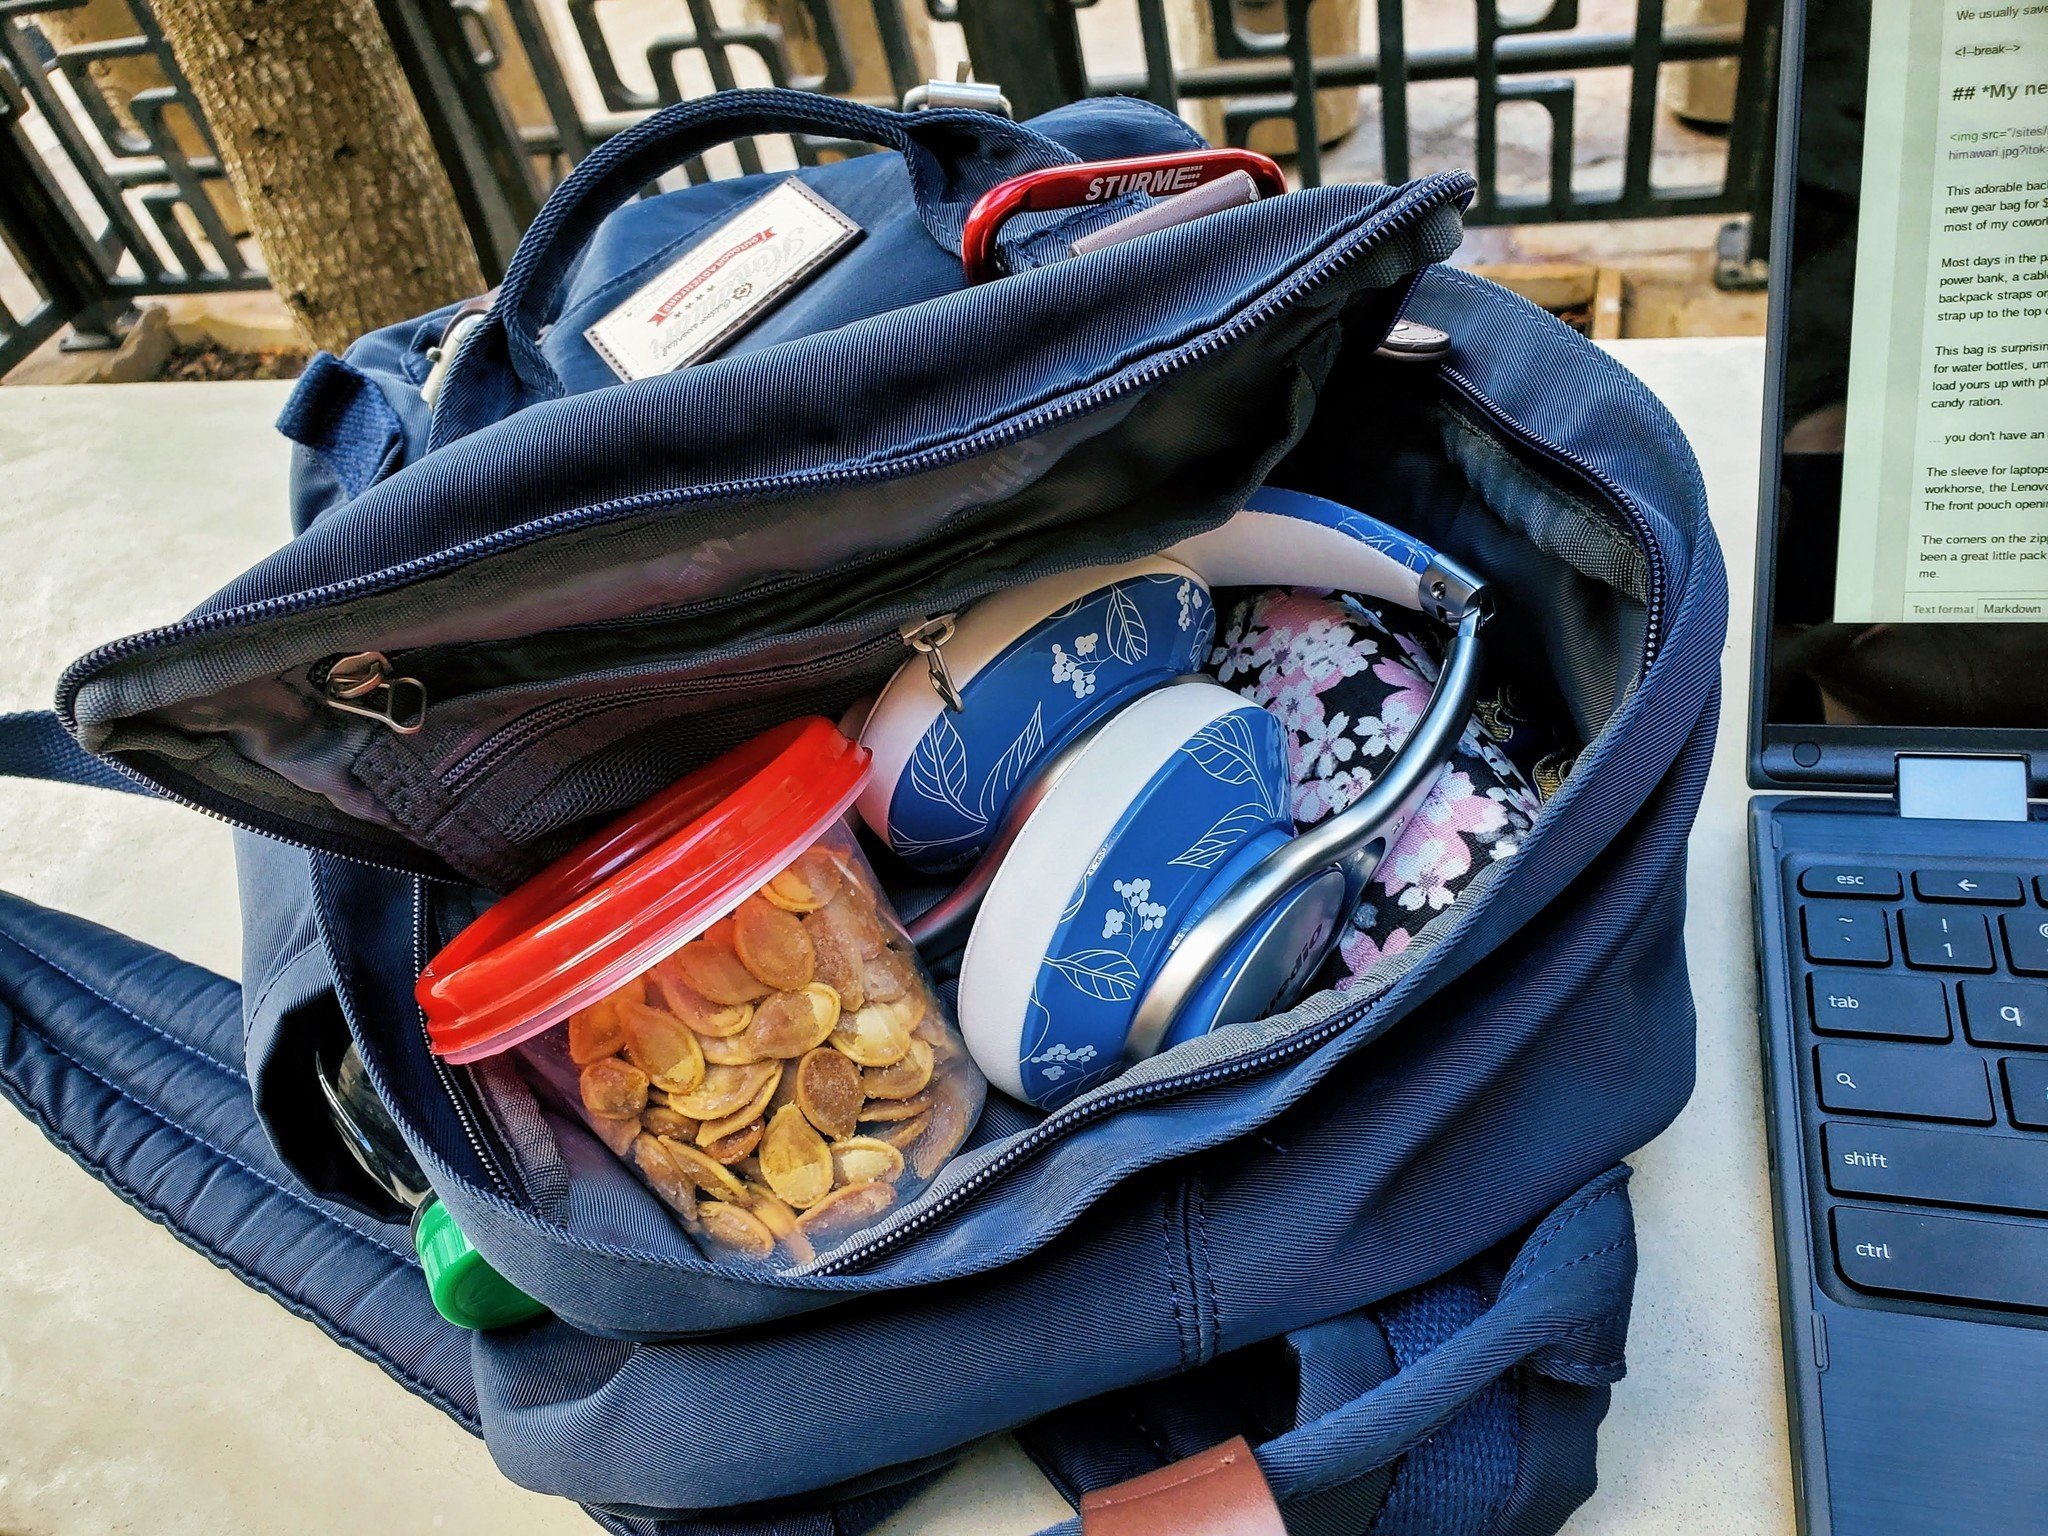 Snacks are some of the most important items to pack